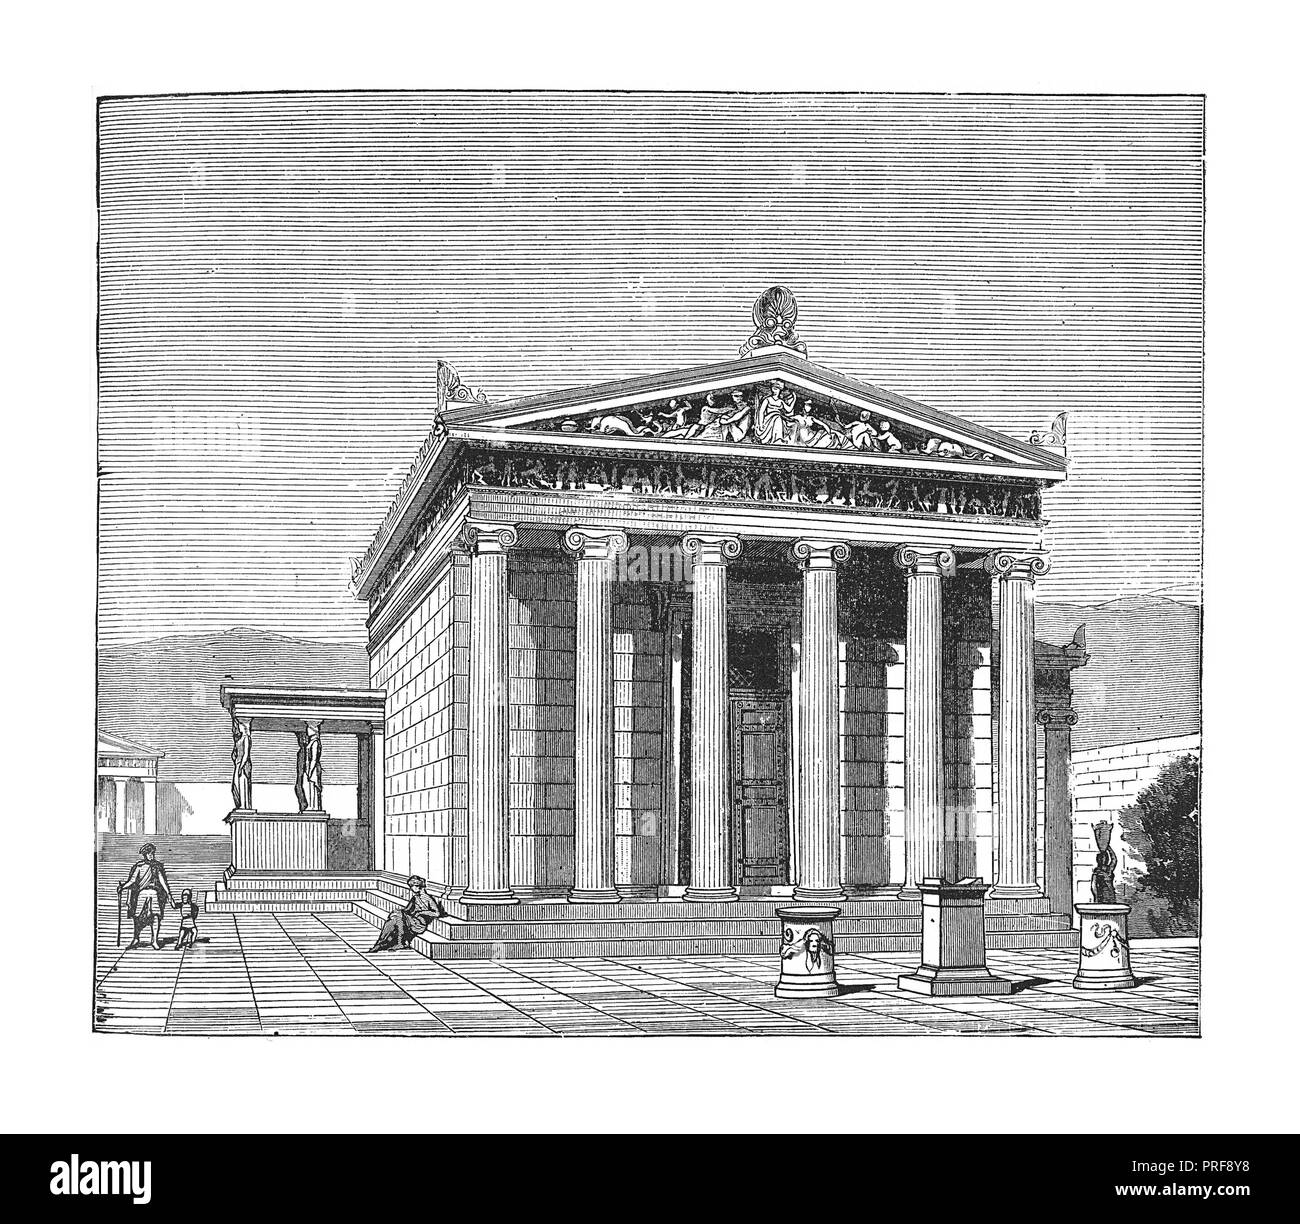 Original artwork (engraving) of the Erechtheion, a building in ancient Athens, Greece, a temple of Poseidon. Published in A pictorial history of the world's great nations: from the earliest dates to the present time. (Charlotte M. Yonge Selmar Hess, New York, 1882). Stock Photo